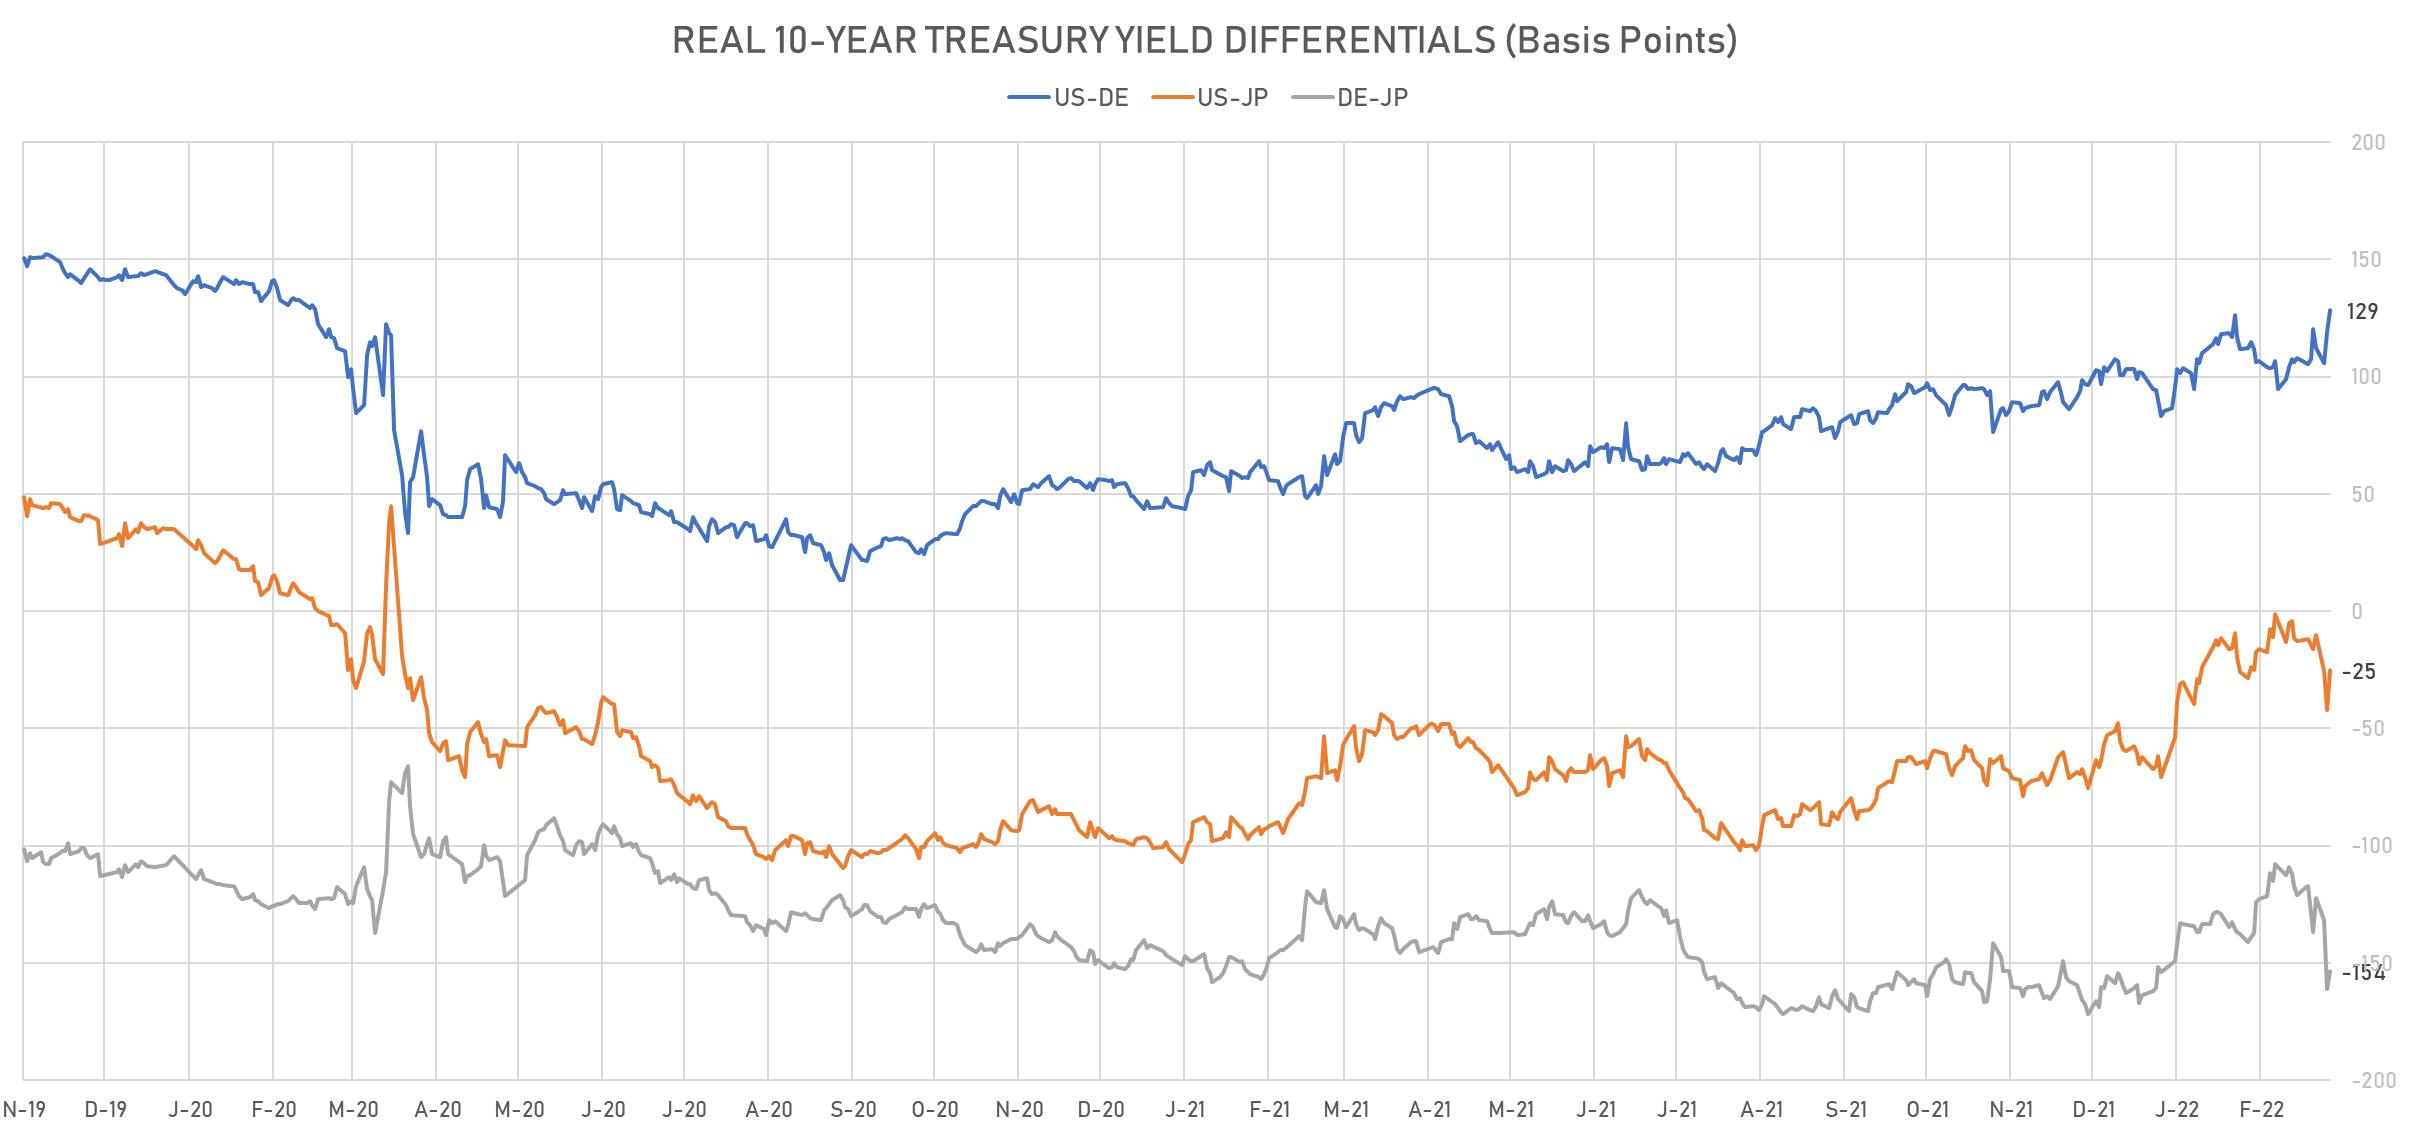 US DE JP Real 10Y Real Yields Differentials | Sources: phipost.com, Refinitiv data